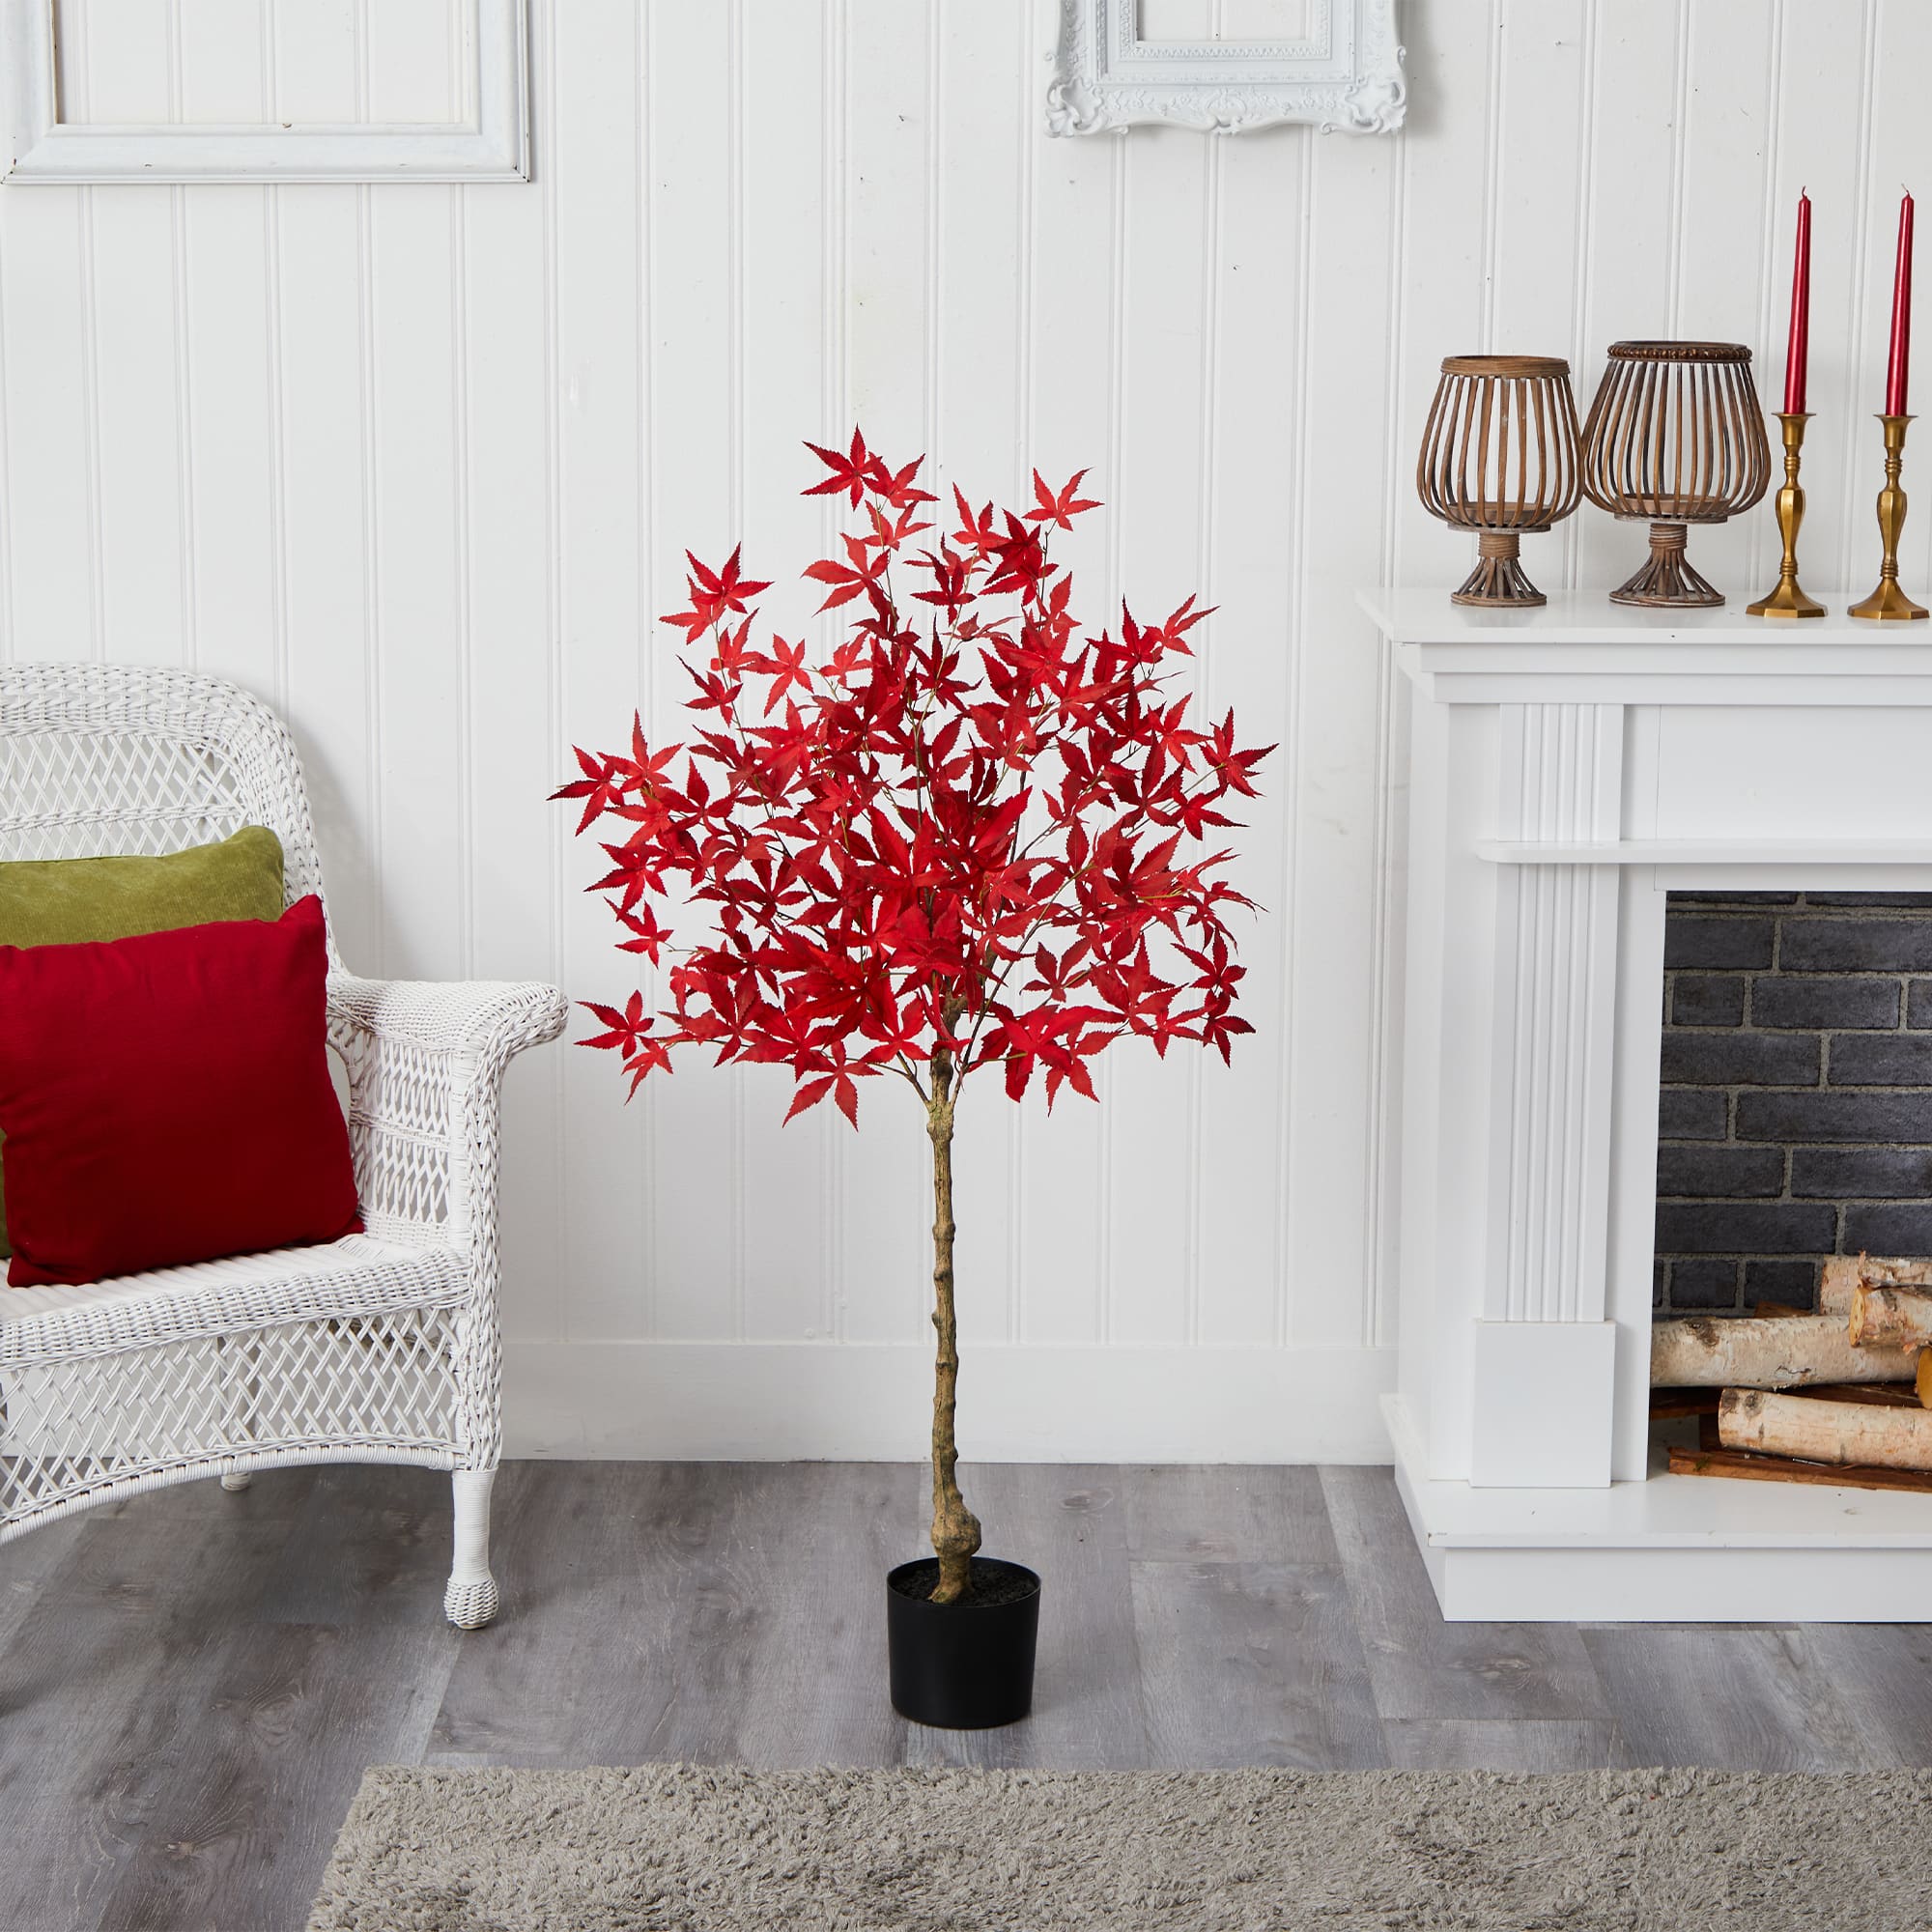 4ft. Autumn Maple Artificial Fall Tree